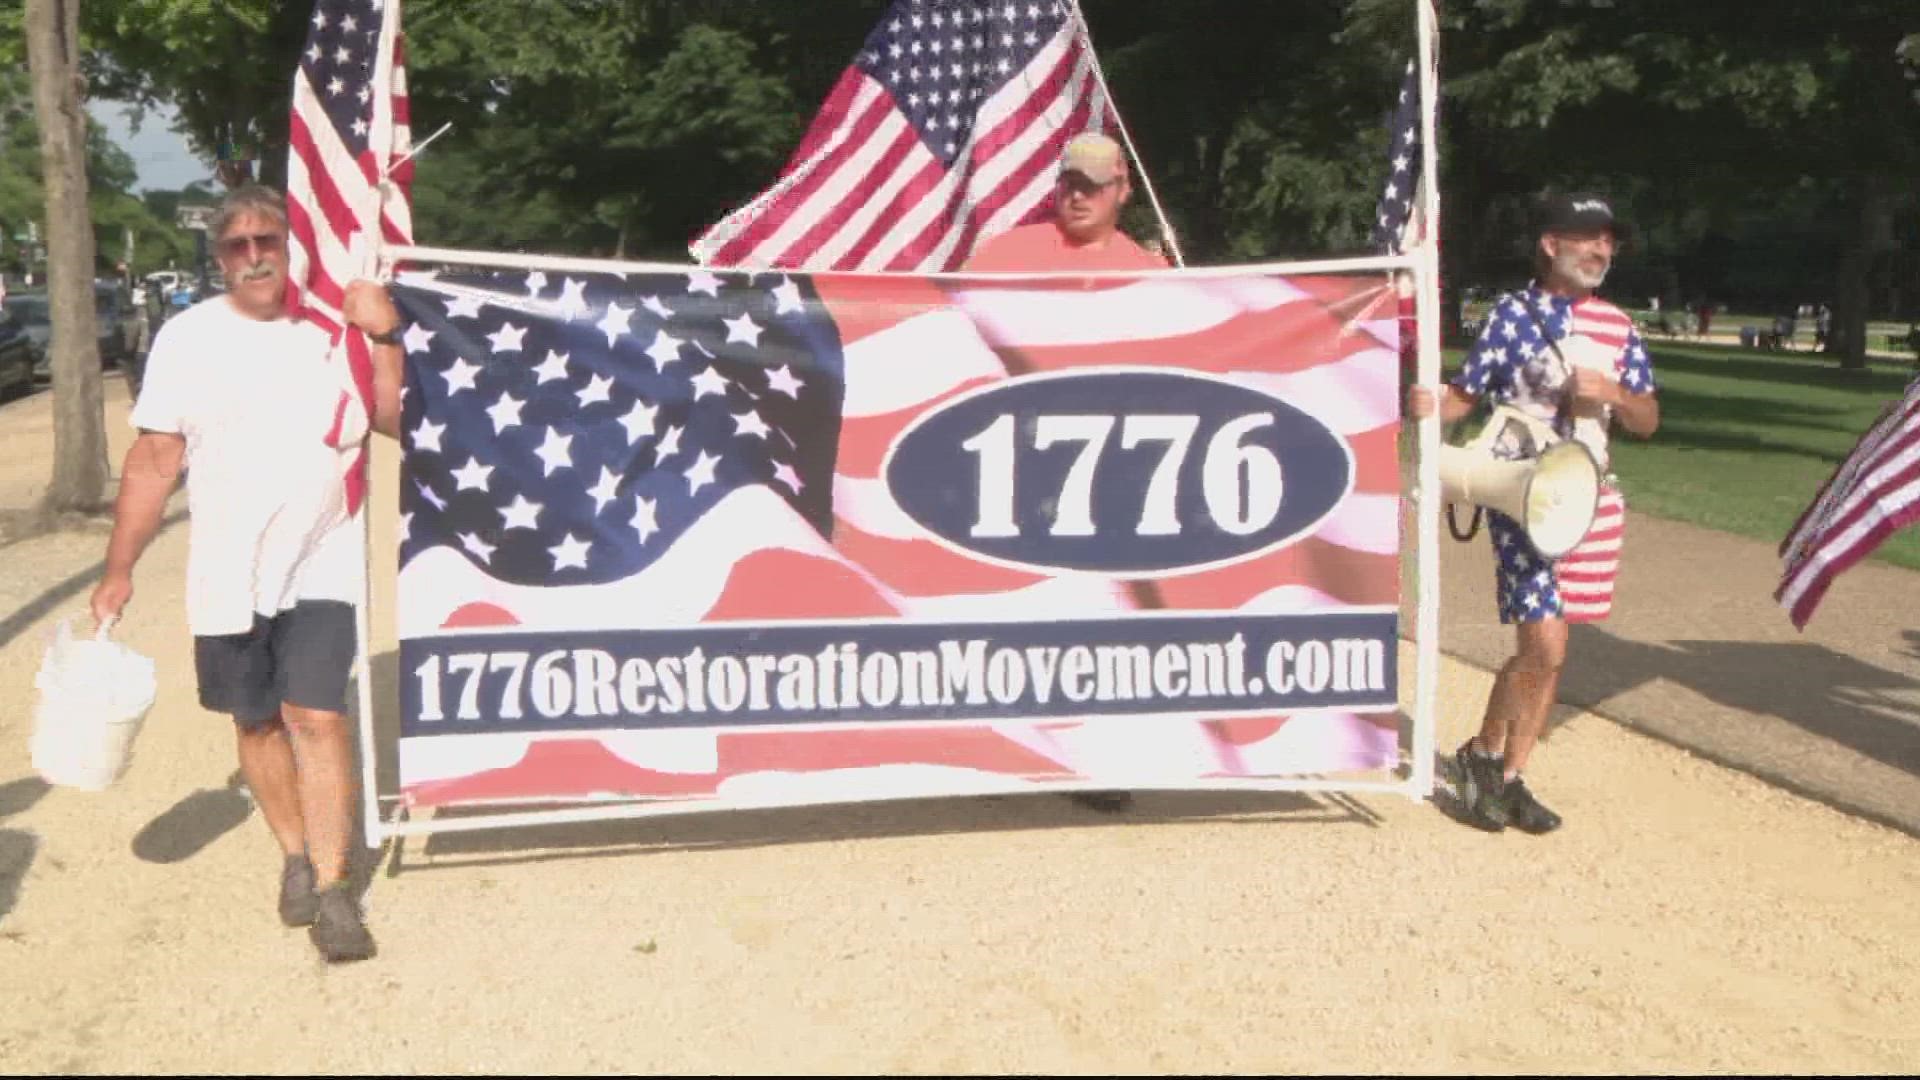 The presence of the 1776 Restoration Movement continues to grow on the National Mall despite not having a permit.